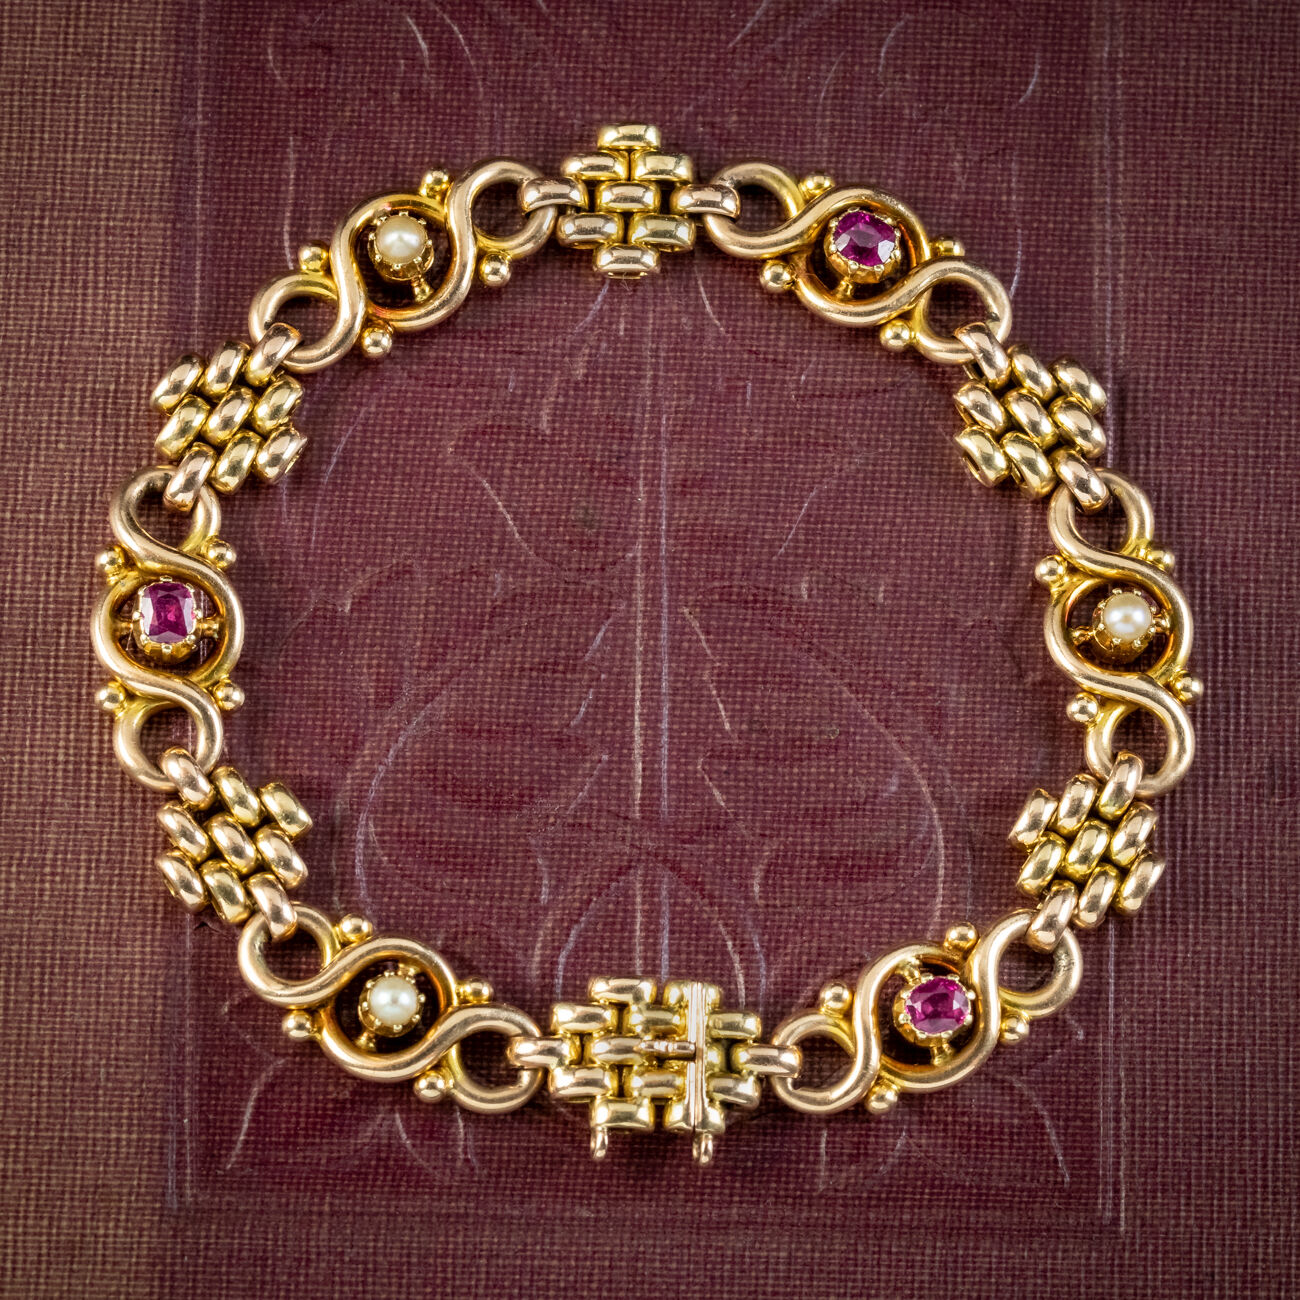 Antique Victorian Ruby Pearl Bracelet 15ct Gold